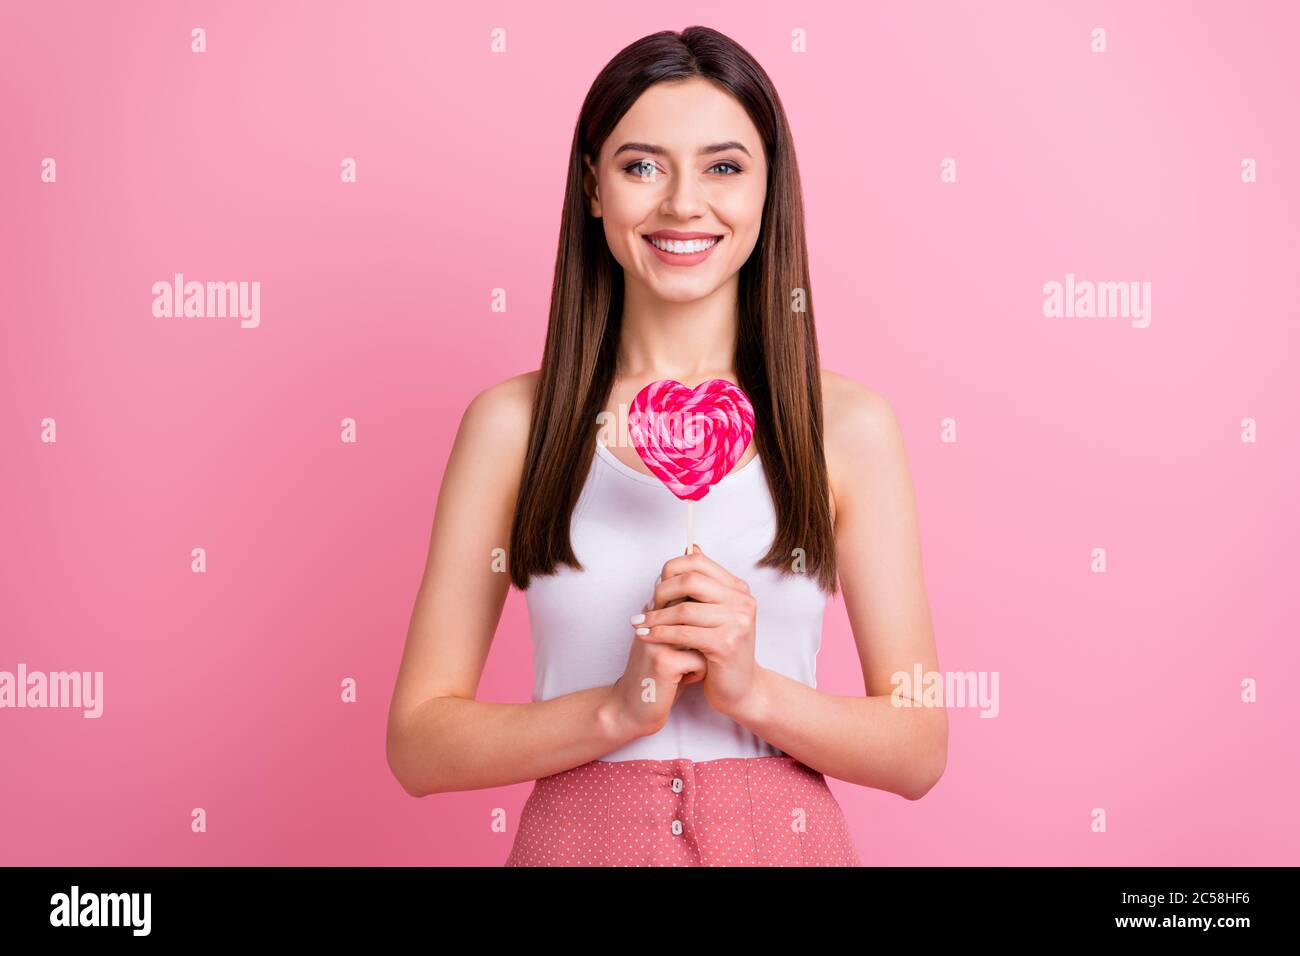 Photo of charming funny lady hold big heart shape lollipop on stick want to try yummy dessert good mood wear white singlet dotted skirt isolated Stock Photo